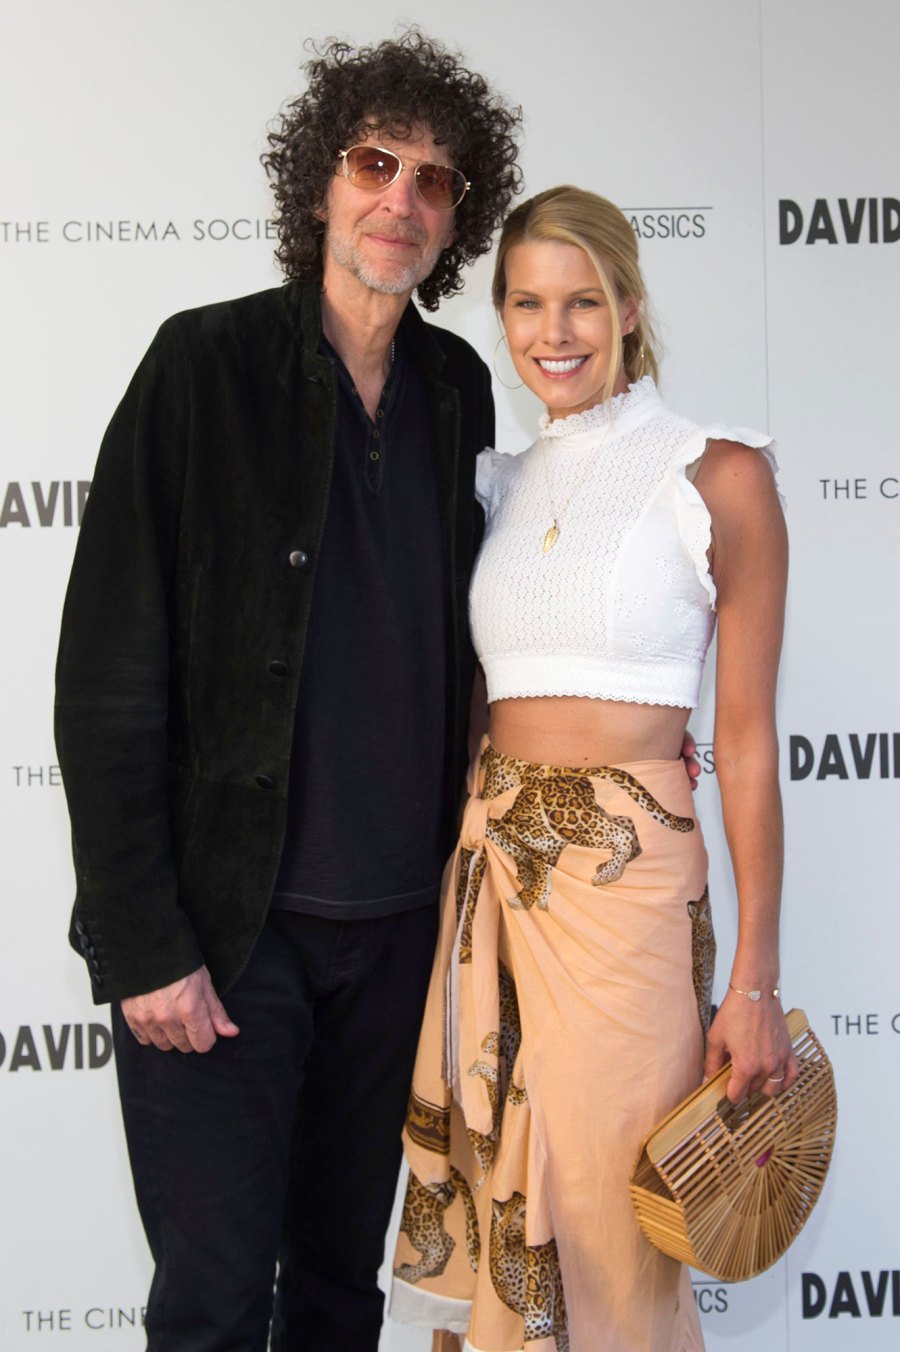 Howard Stern and Beth Ostrosky Breast Cancer Scare